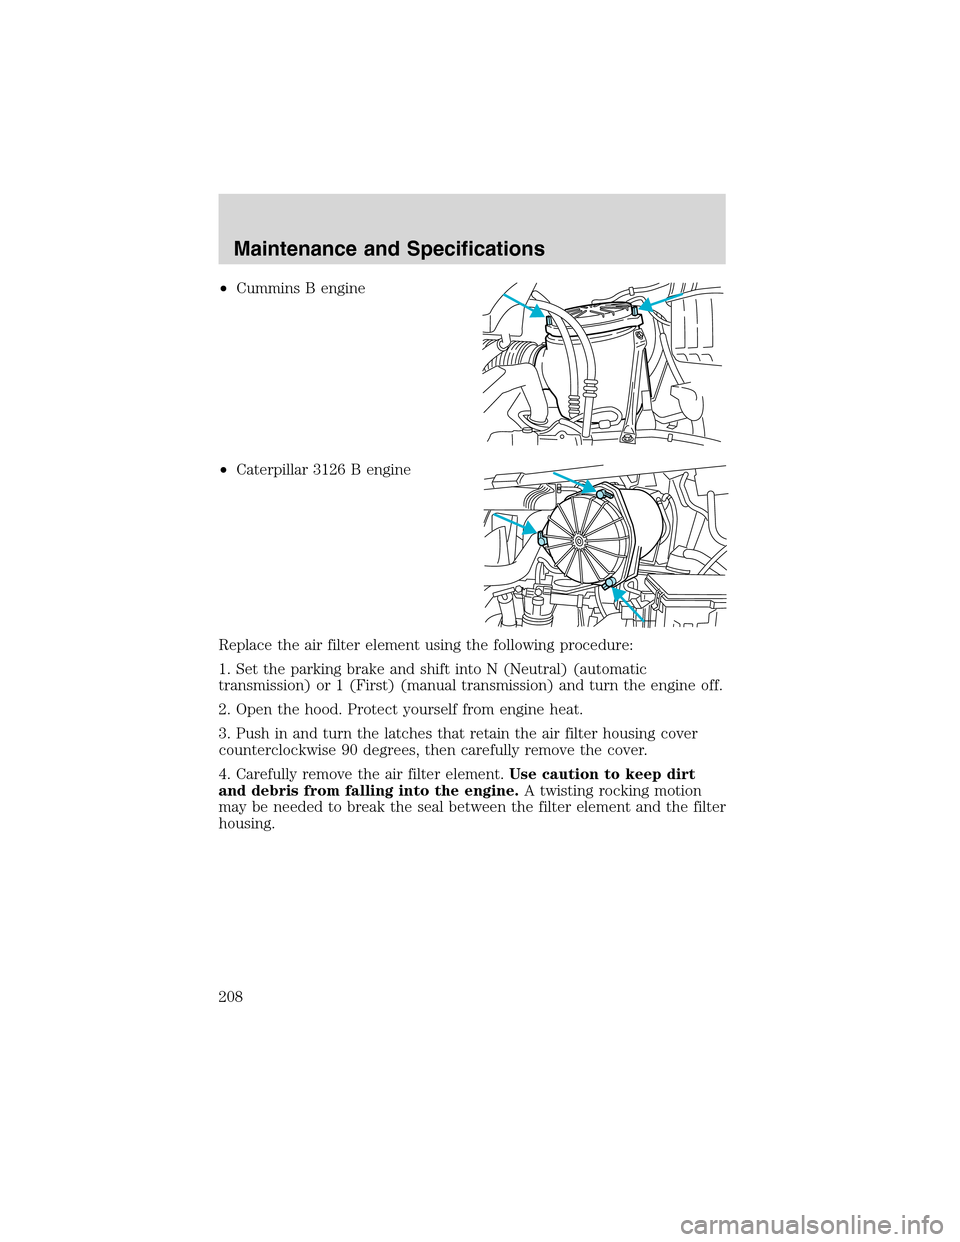 FORD F650 2003 10.G User Guide •Cummins B engine
•Caterpillar 3126 B engine
Replace the air filter element using the following procedure:
1. Set the parking brake and shift into N (Neutral) (automatic
transmission) or 1 (First)